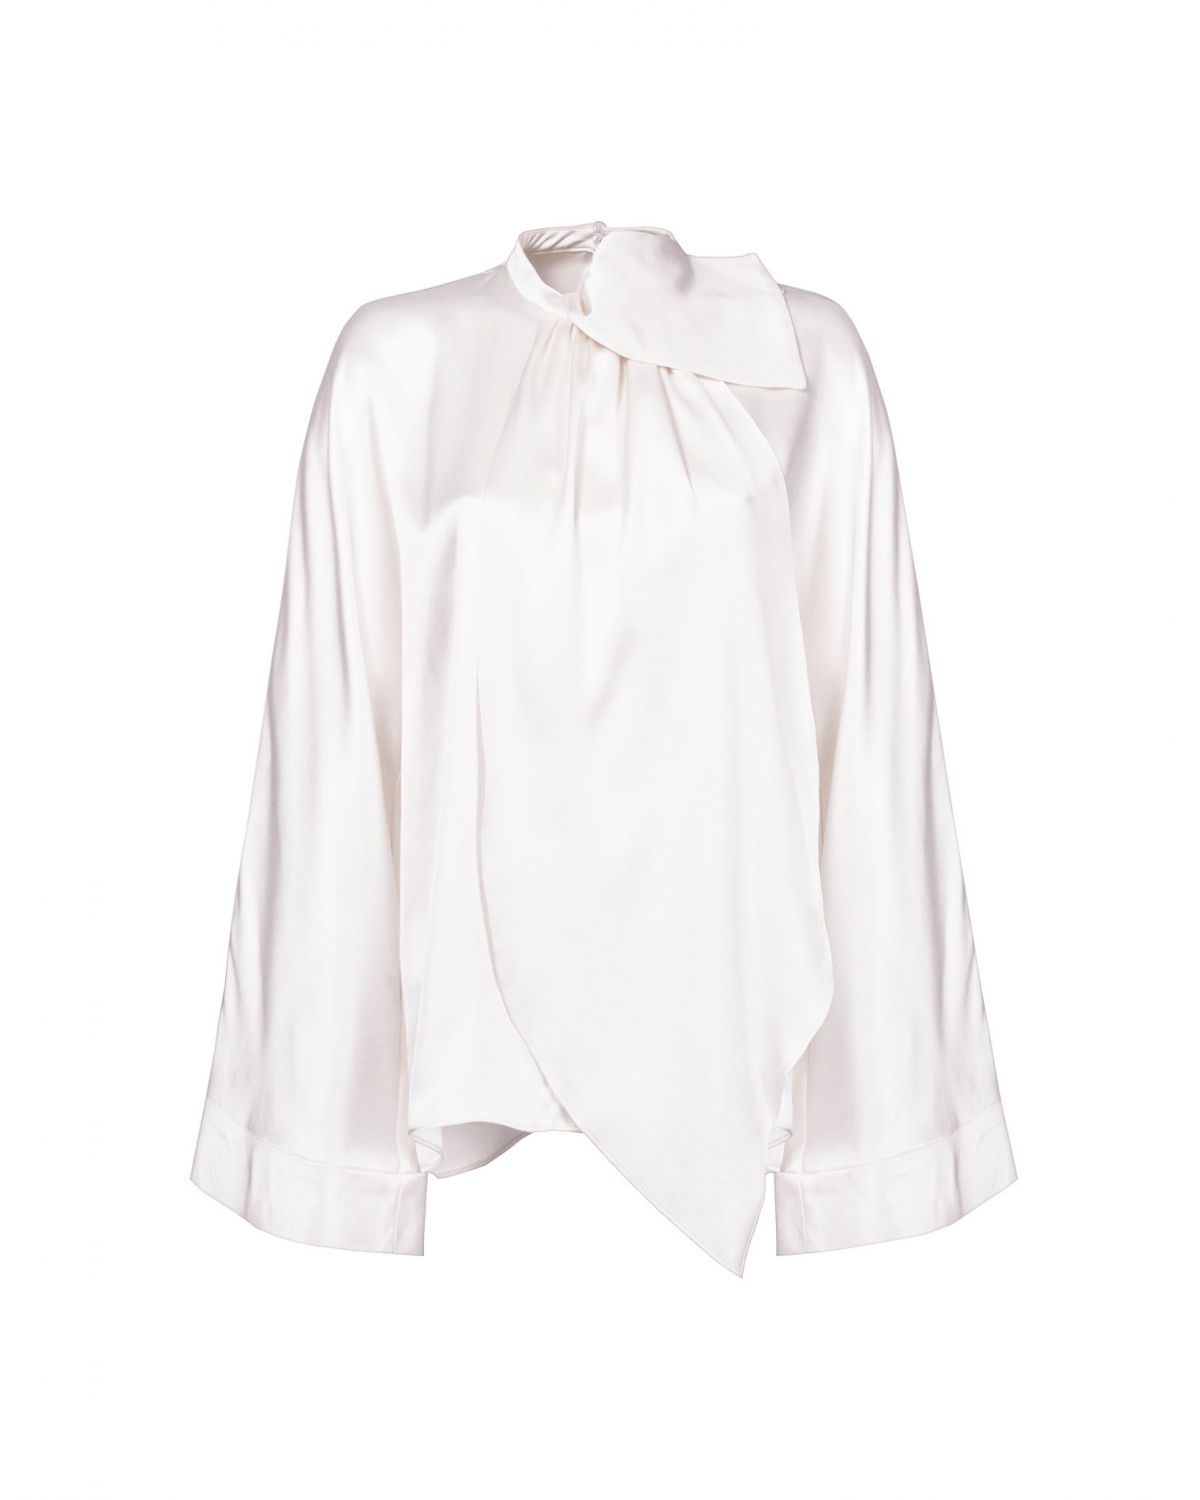 White sustainable silk blouse | The sustainable wardrobe | Genny